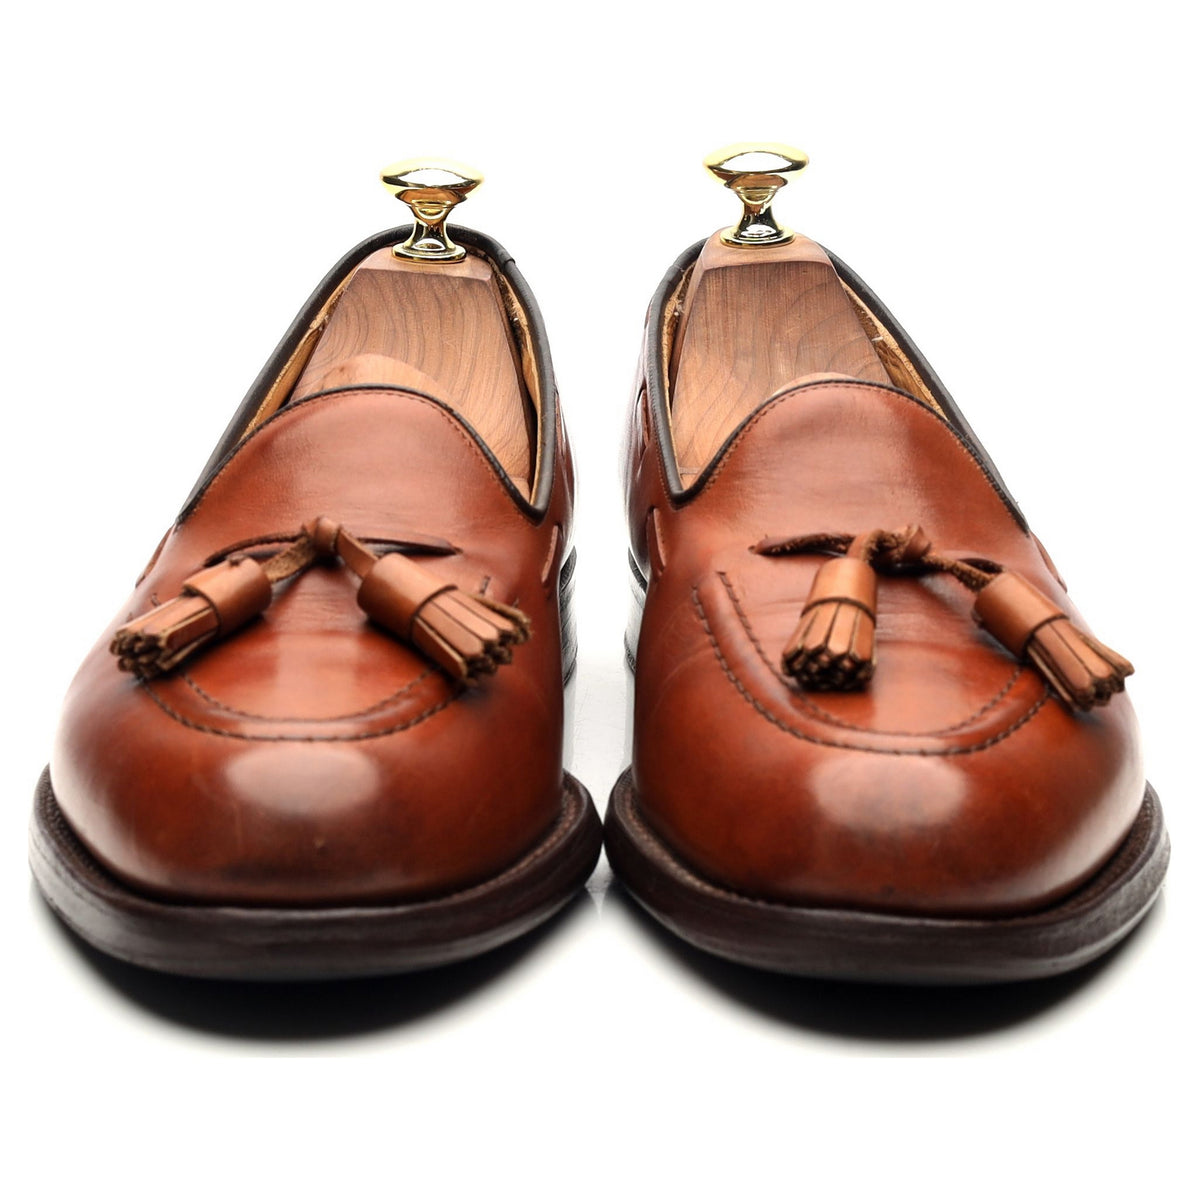 &#39;Melbourne&#39; Tan Brown Leather Loafers UK 7.5 F